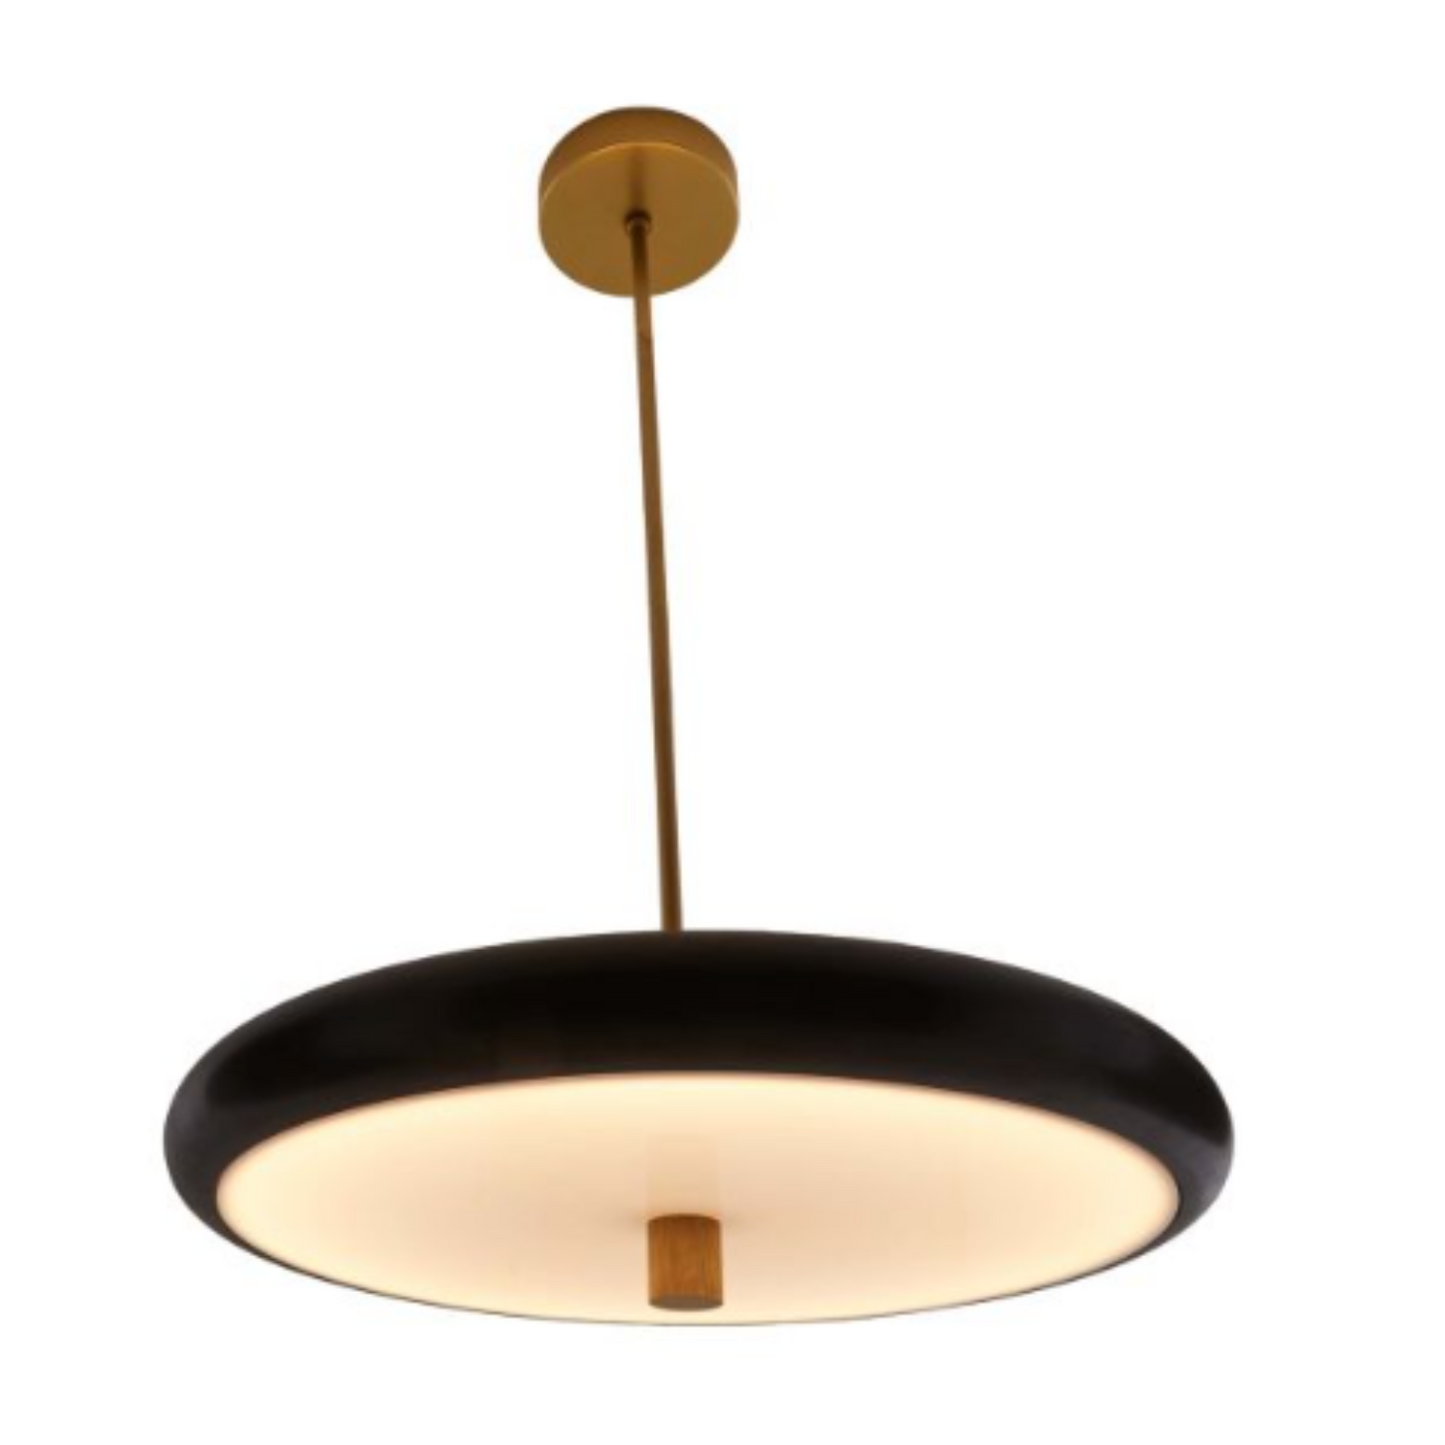 Plato Pendant - Saucer-Shaped English Bronze Iron with Frosted Acrylic Diffuser